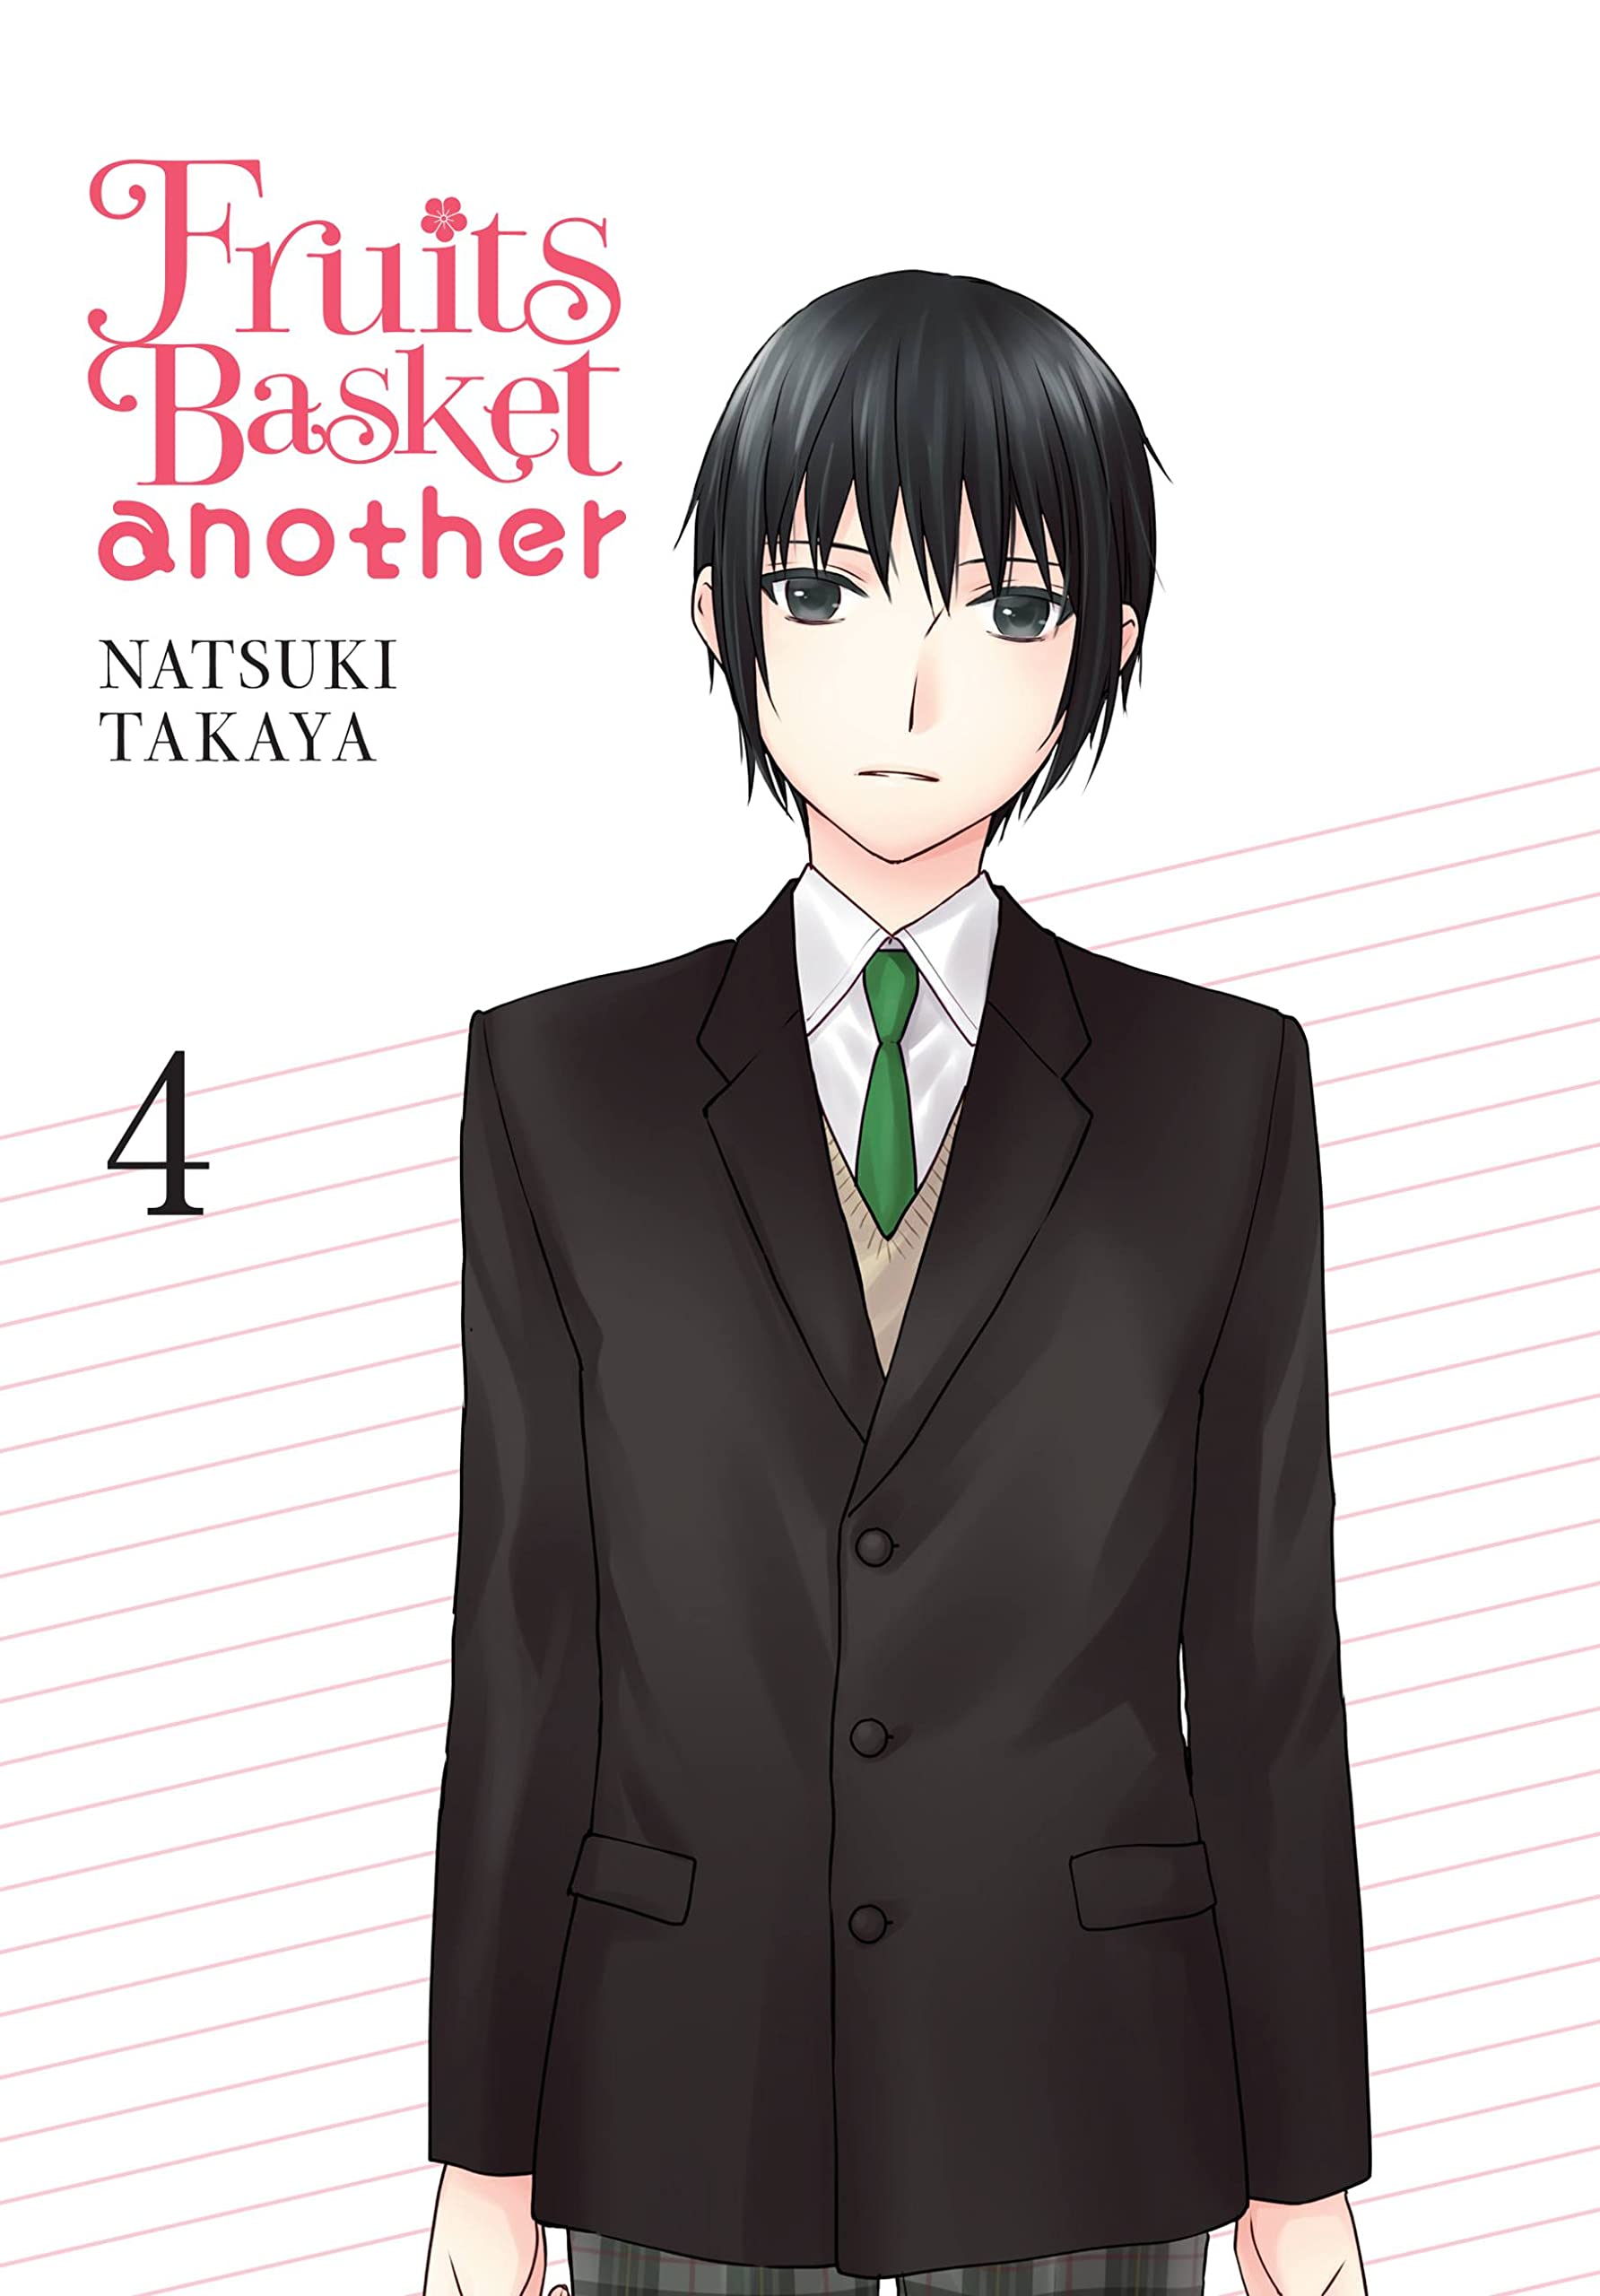 Fruits Basket Another - Volume 4